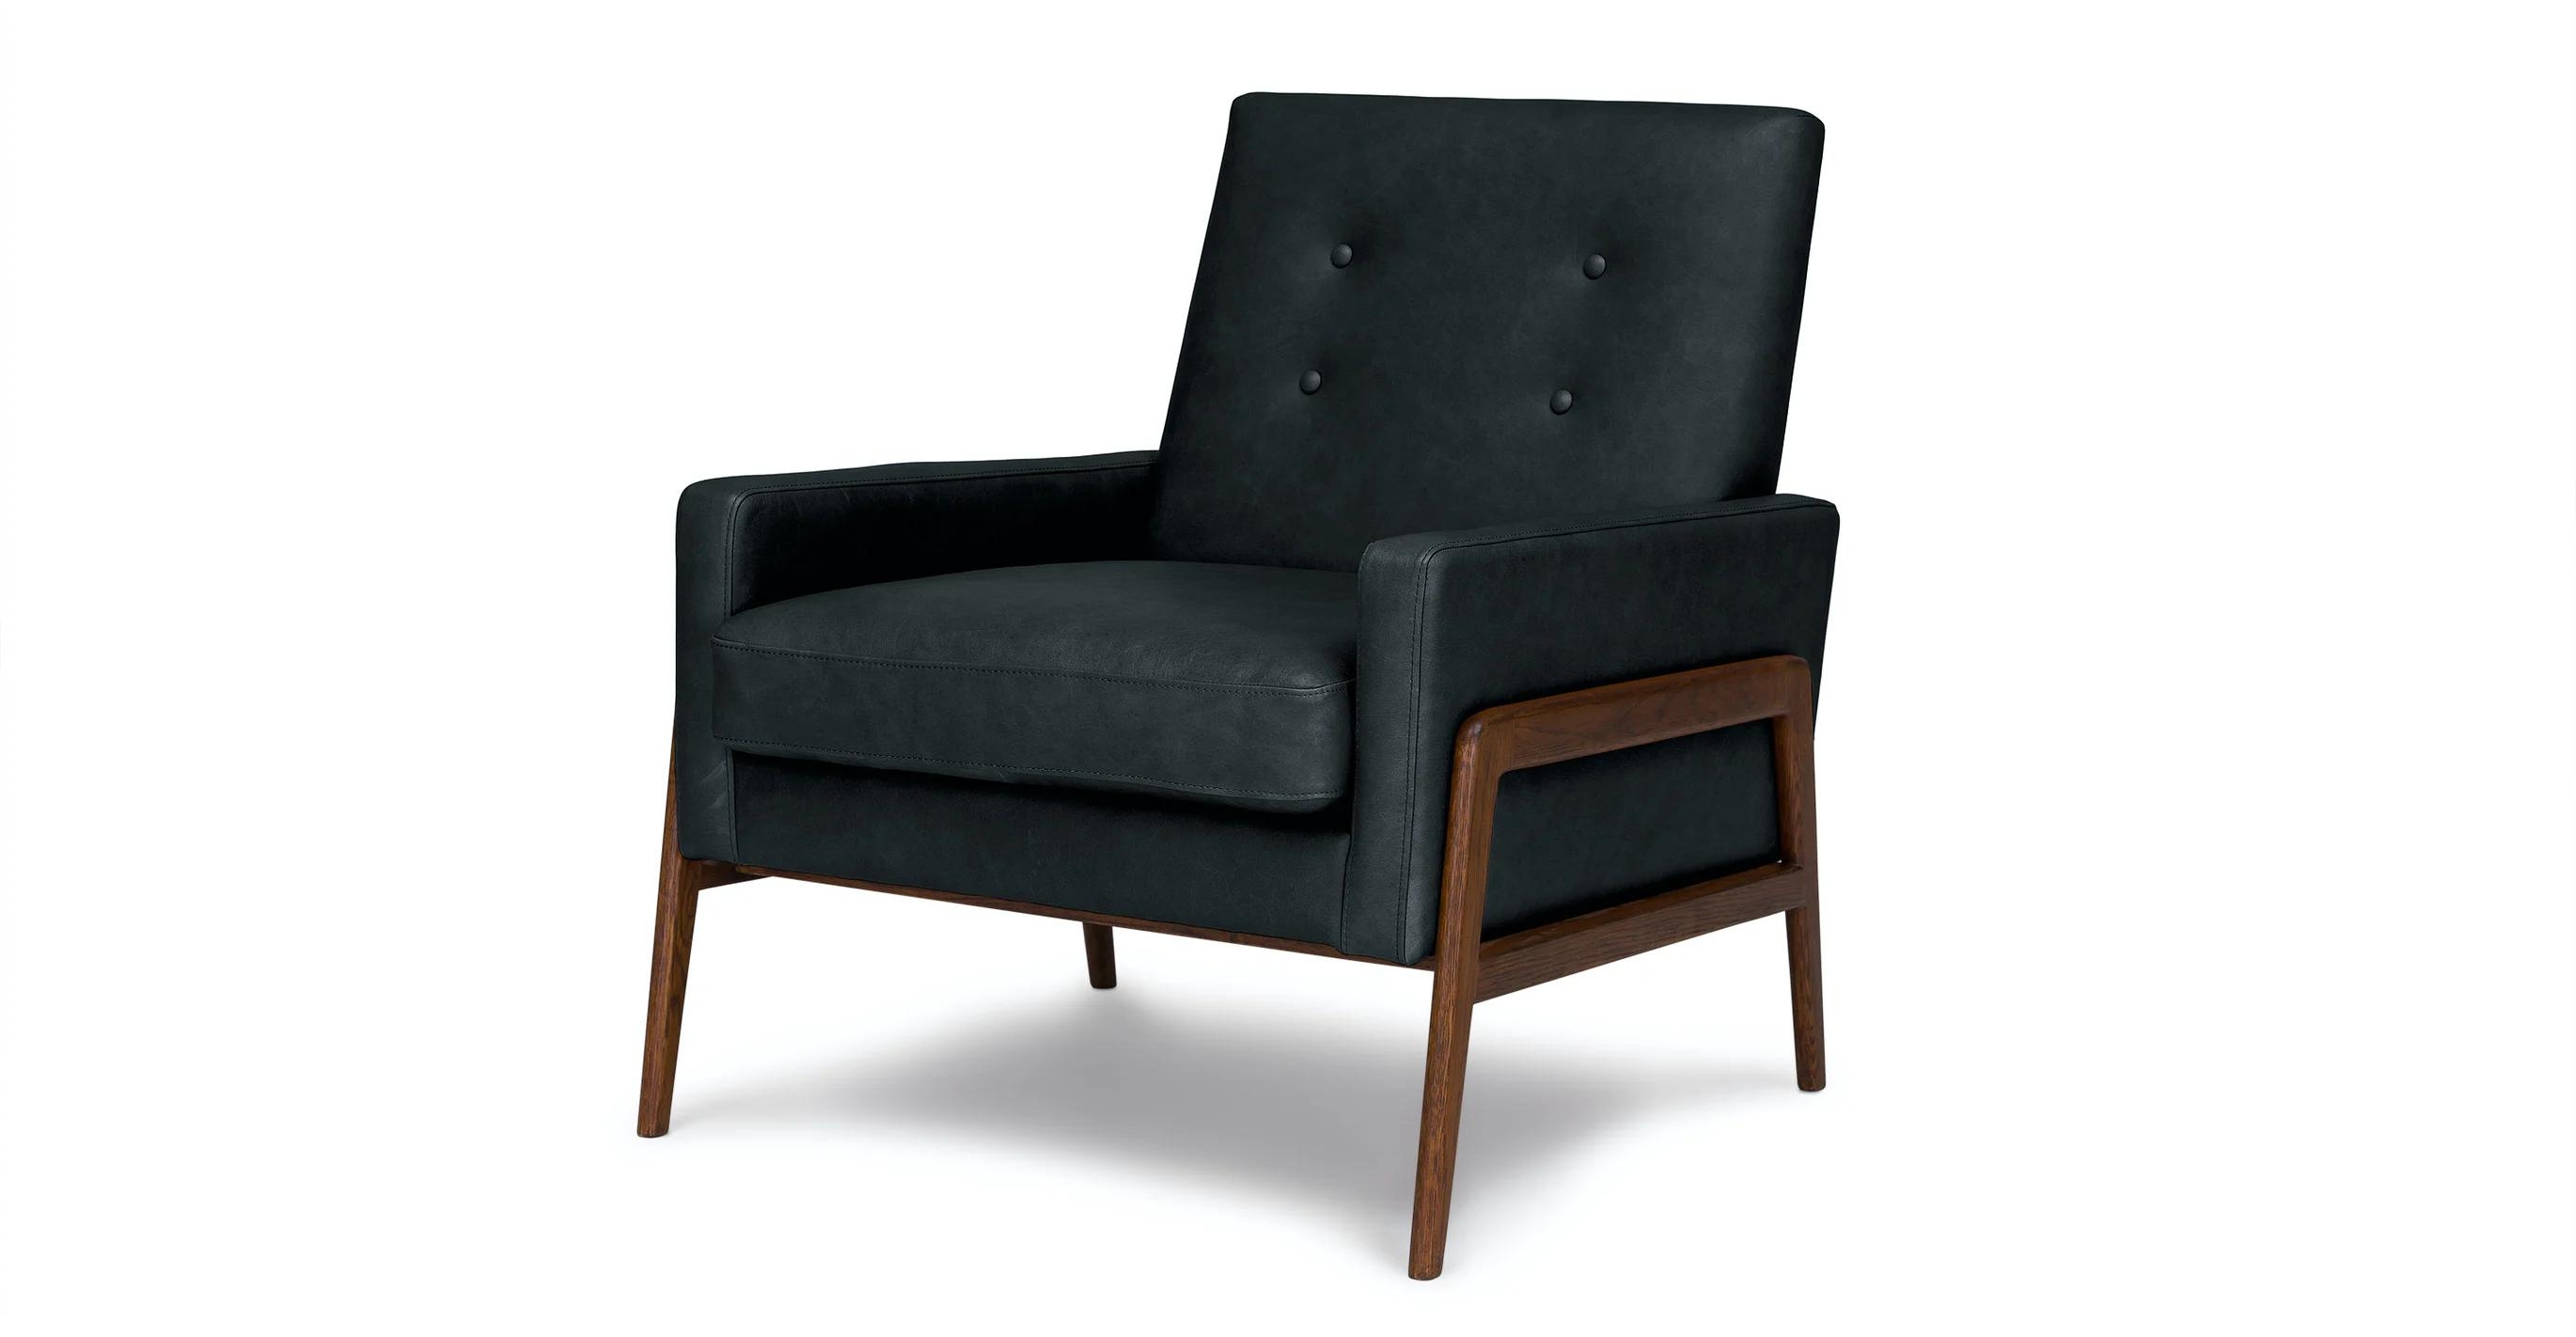 Nord Charme Black Chair - Image 2